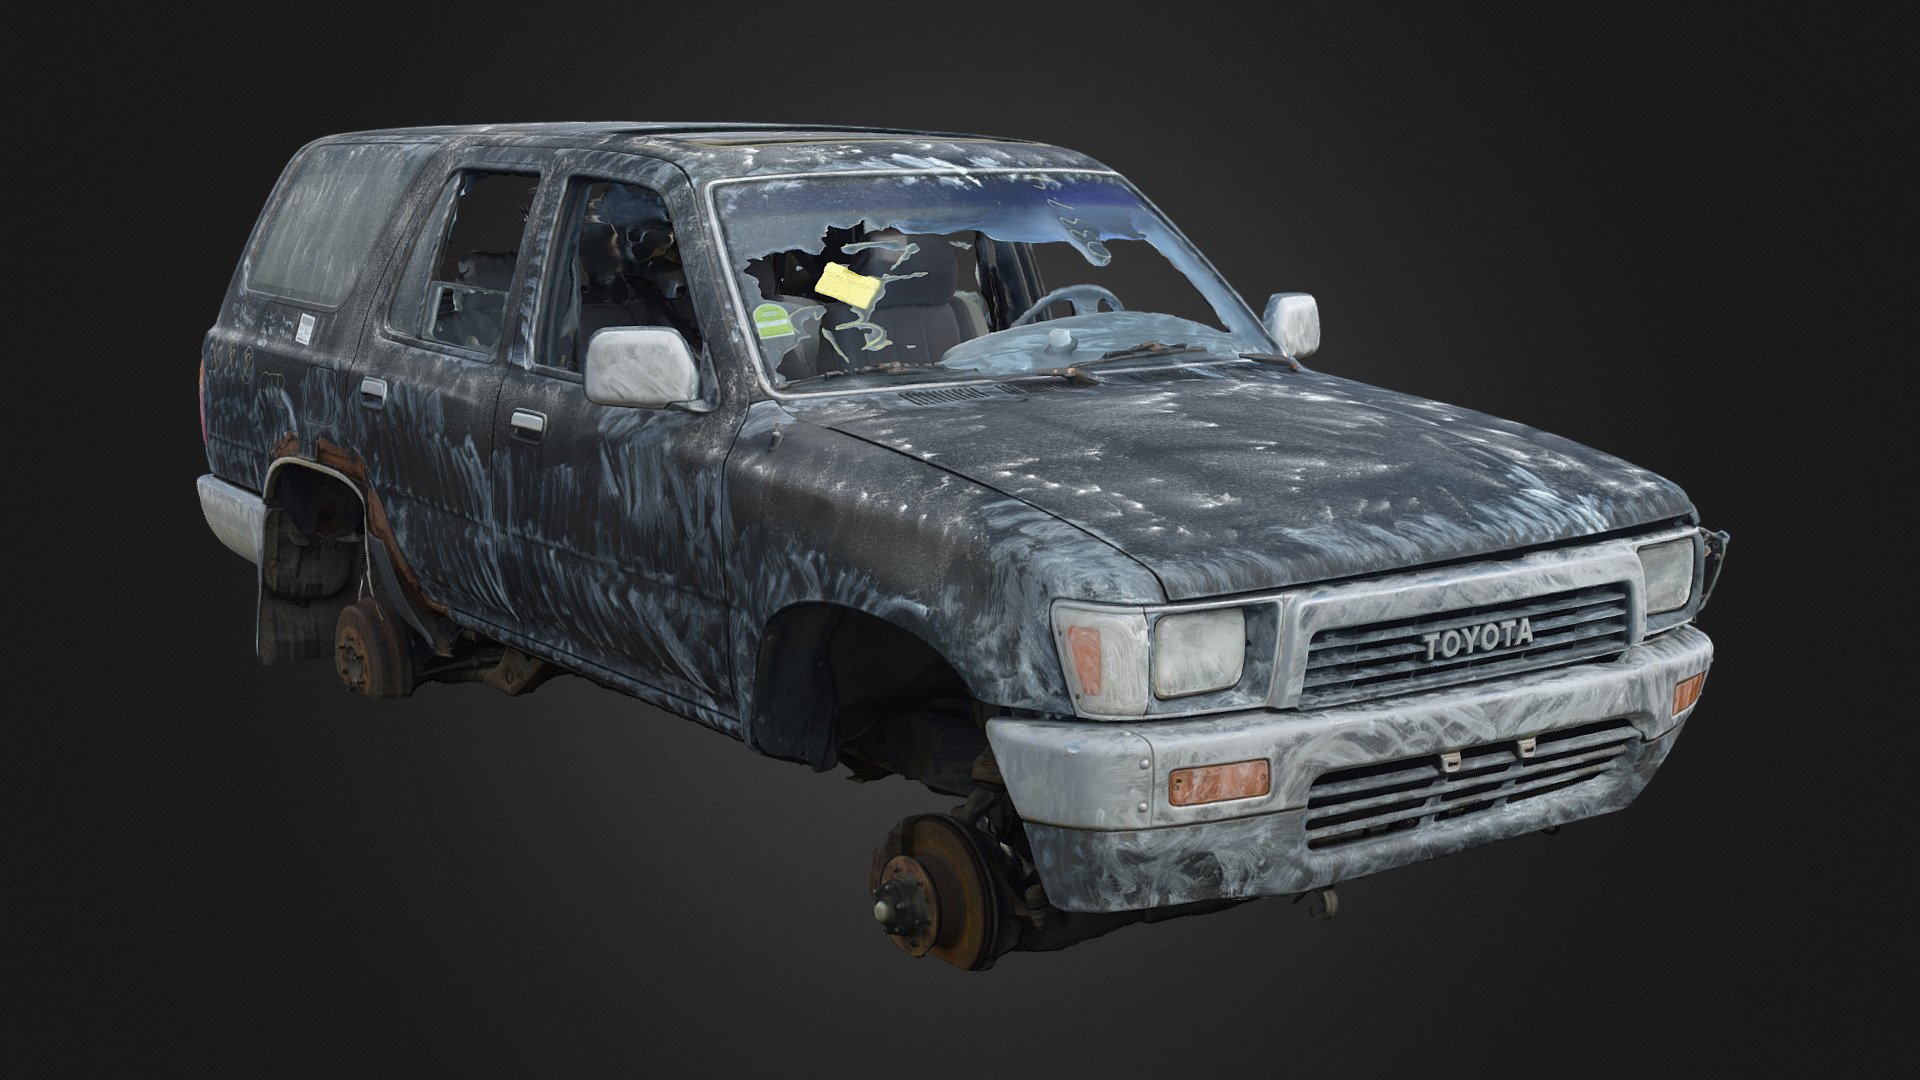 High-accuracy photoscan Intended for use as modeling reference.

Photos taken with my Nikon D3400 and polarizing filter

Created in RealityCapture from 2440 images - 1990-1991 4Runner [Scan] - 3D model by Rush_Freak 3d model